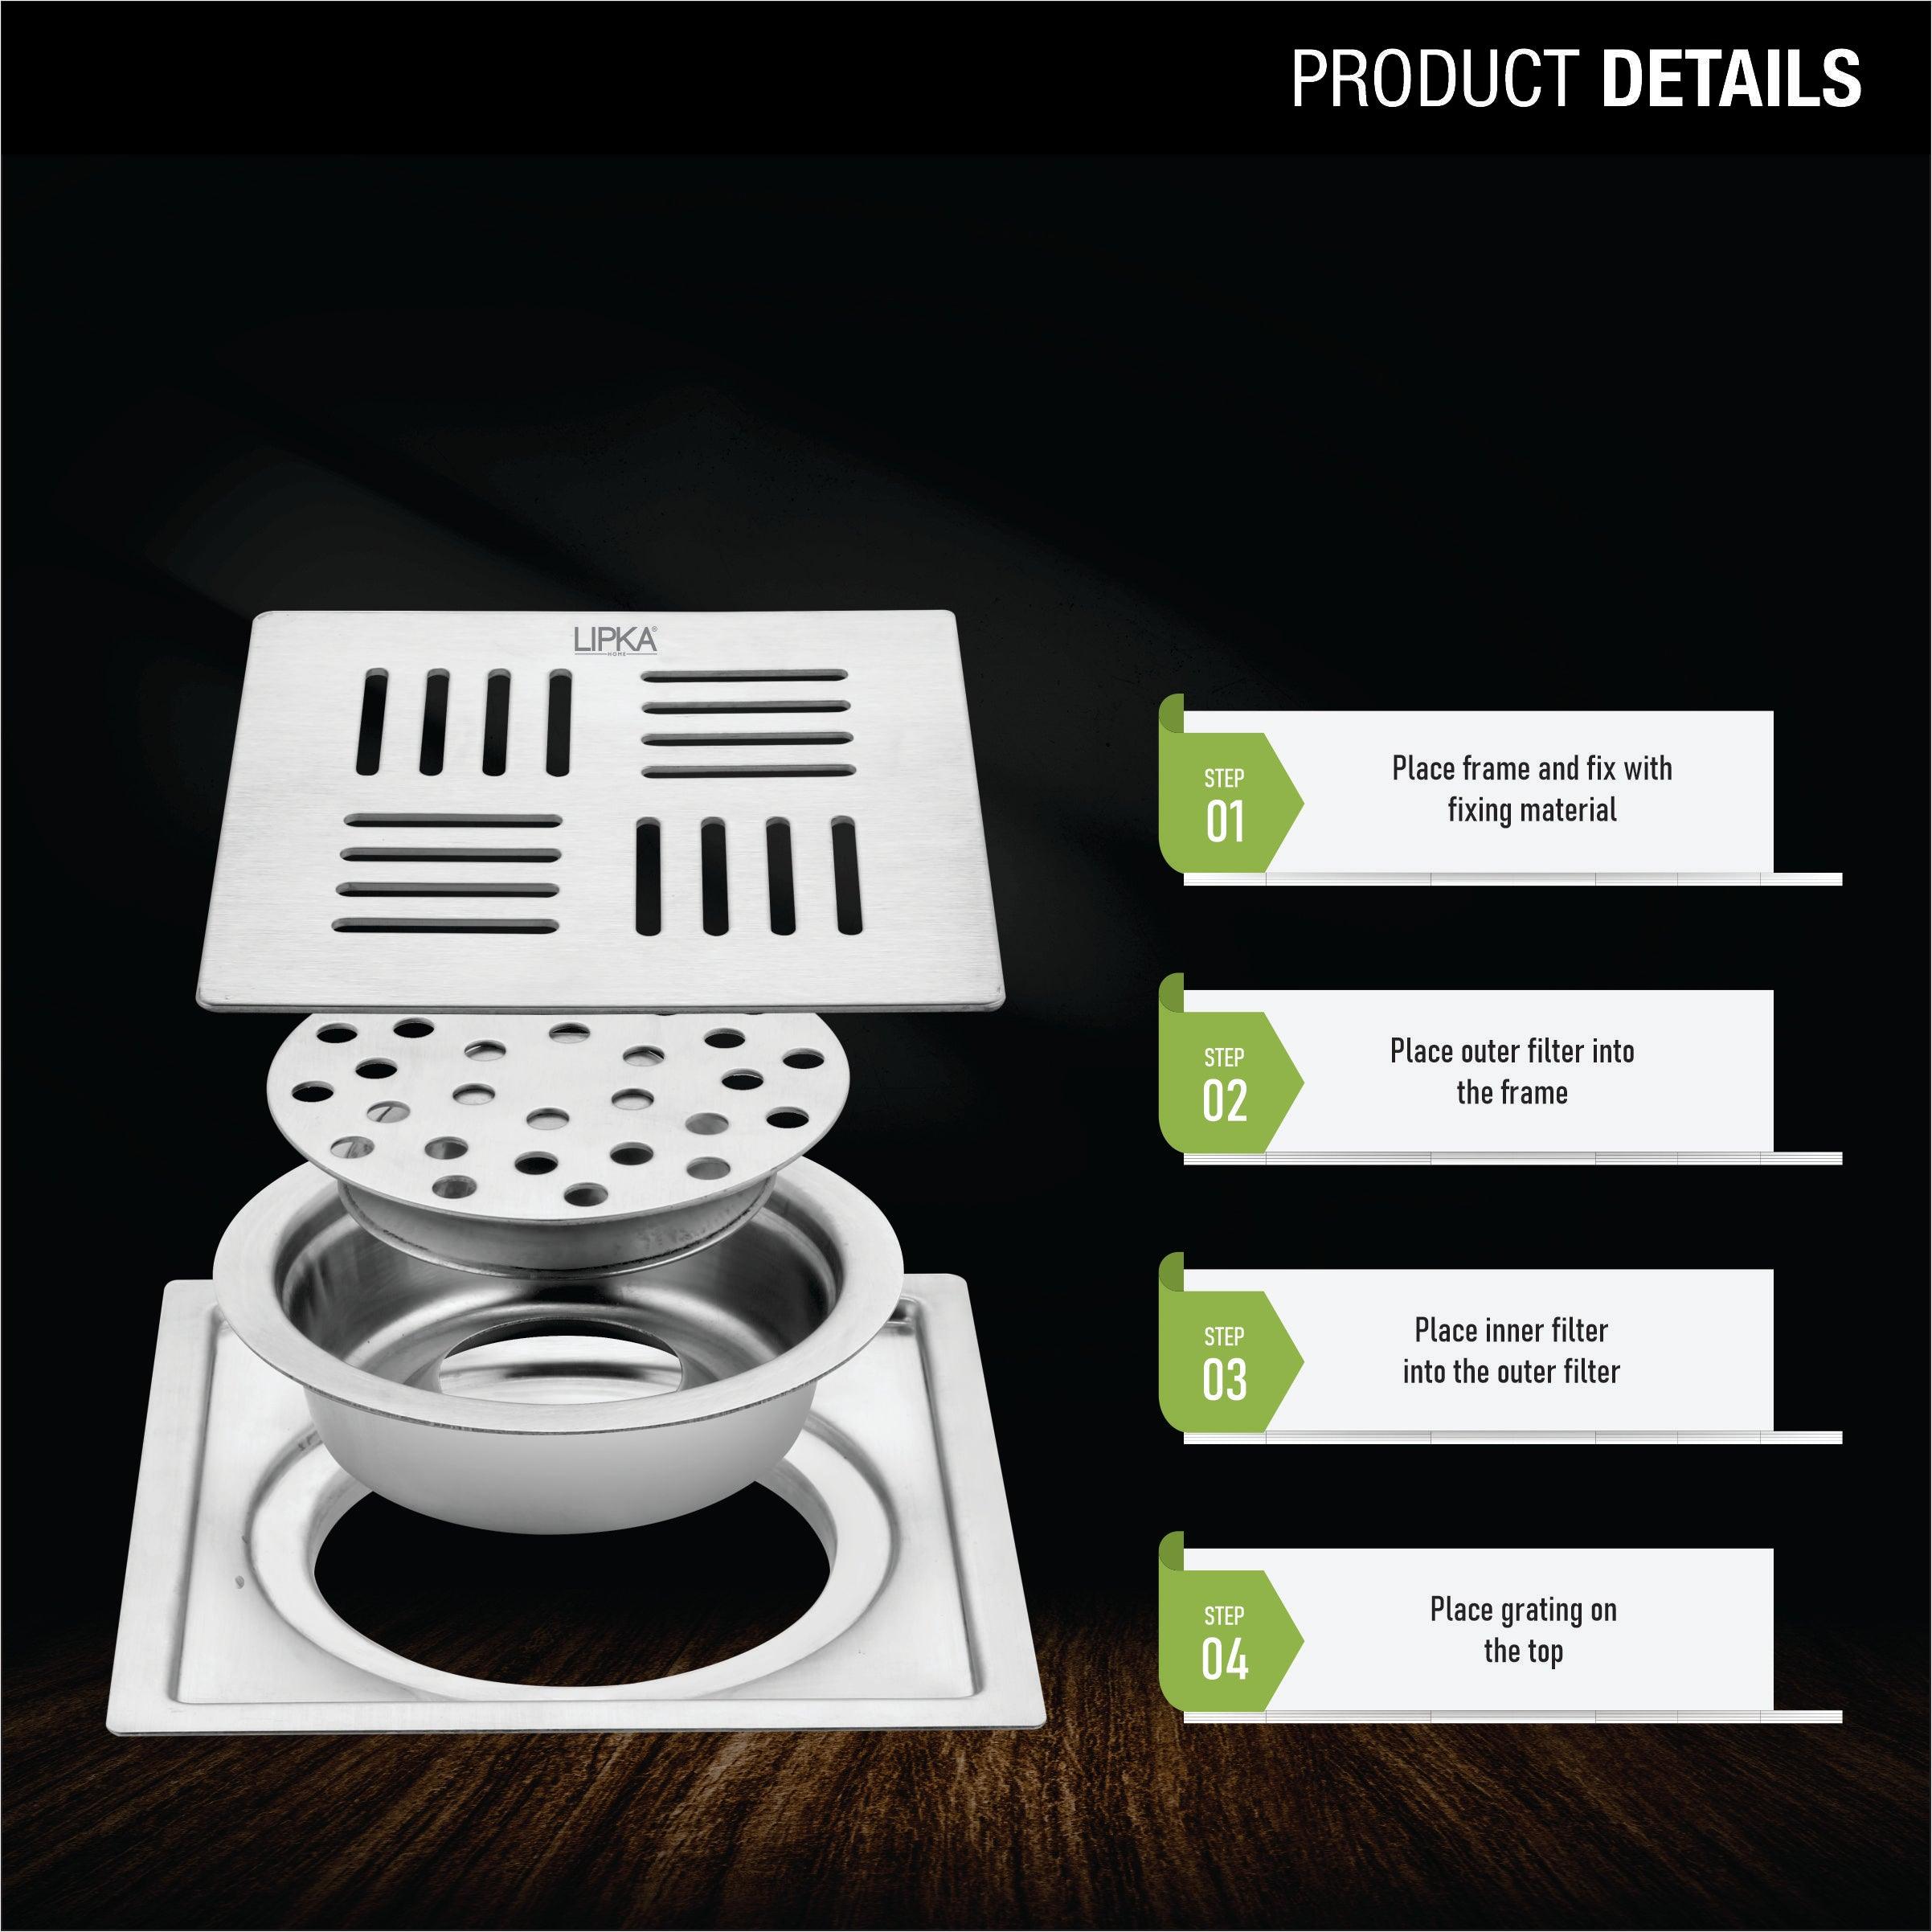 Pink Exclusive Square Flat Cut Floor Drain (6 x 6 Inches) with Cockroach Trap product details